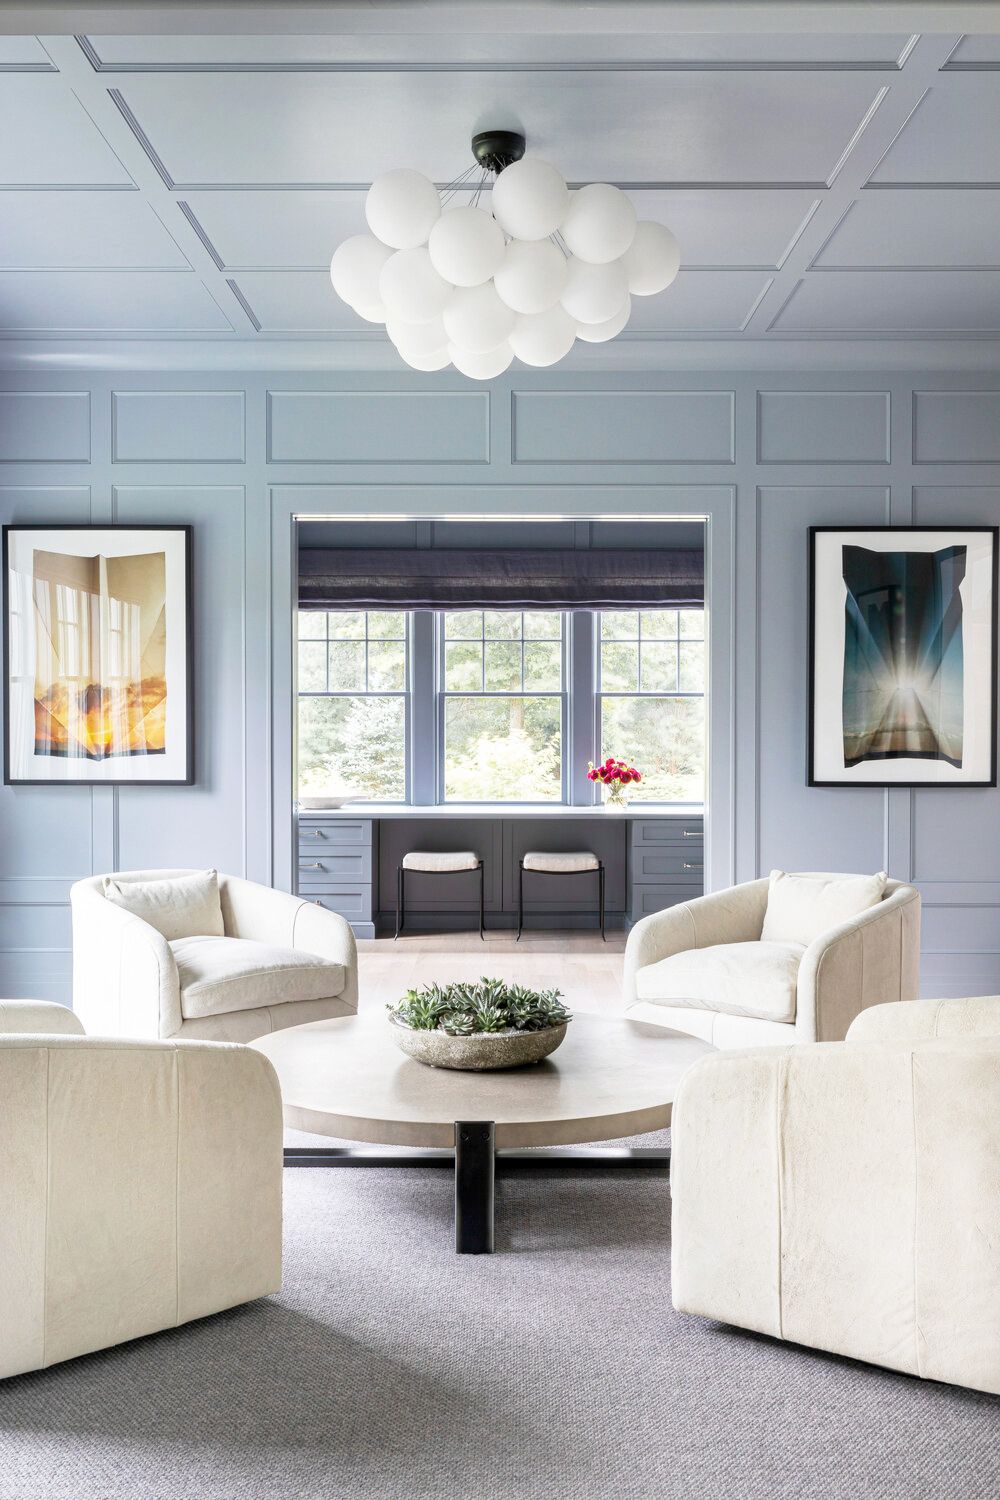 Painted Ceilings That Make the Entire Room So Much Cooler